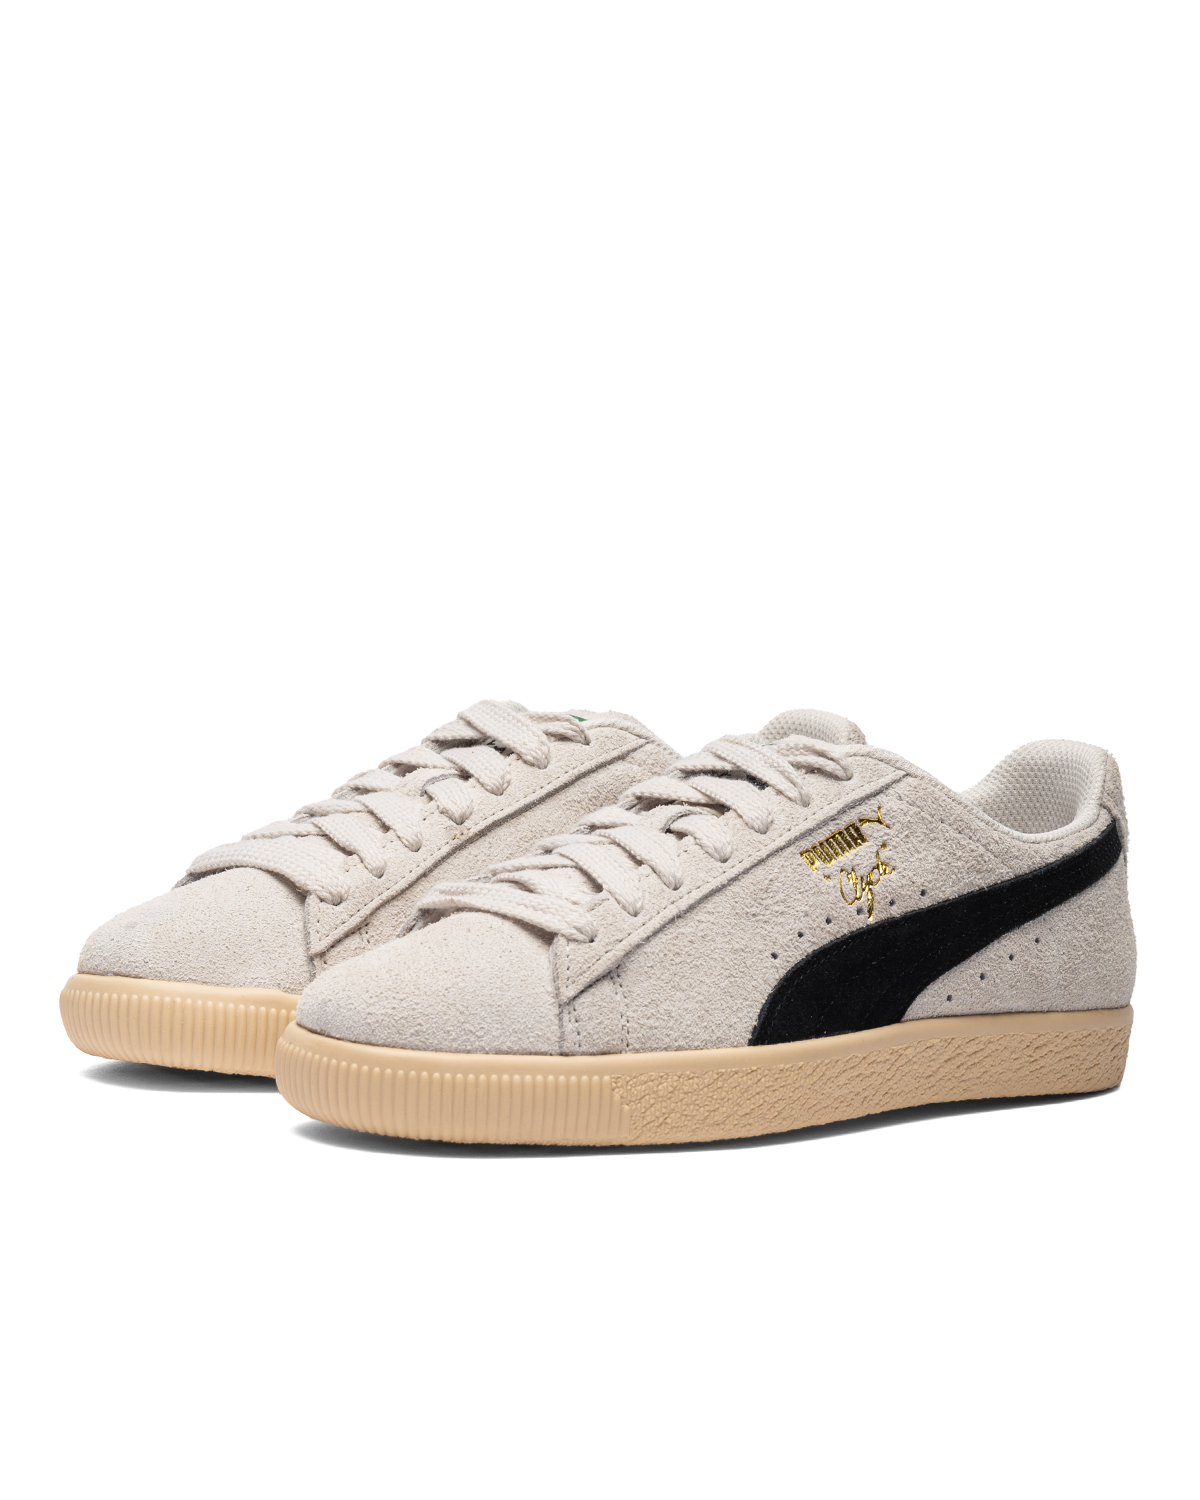 Clyde Hairy Suede Sedate Gray/Cashew